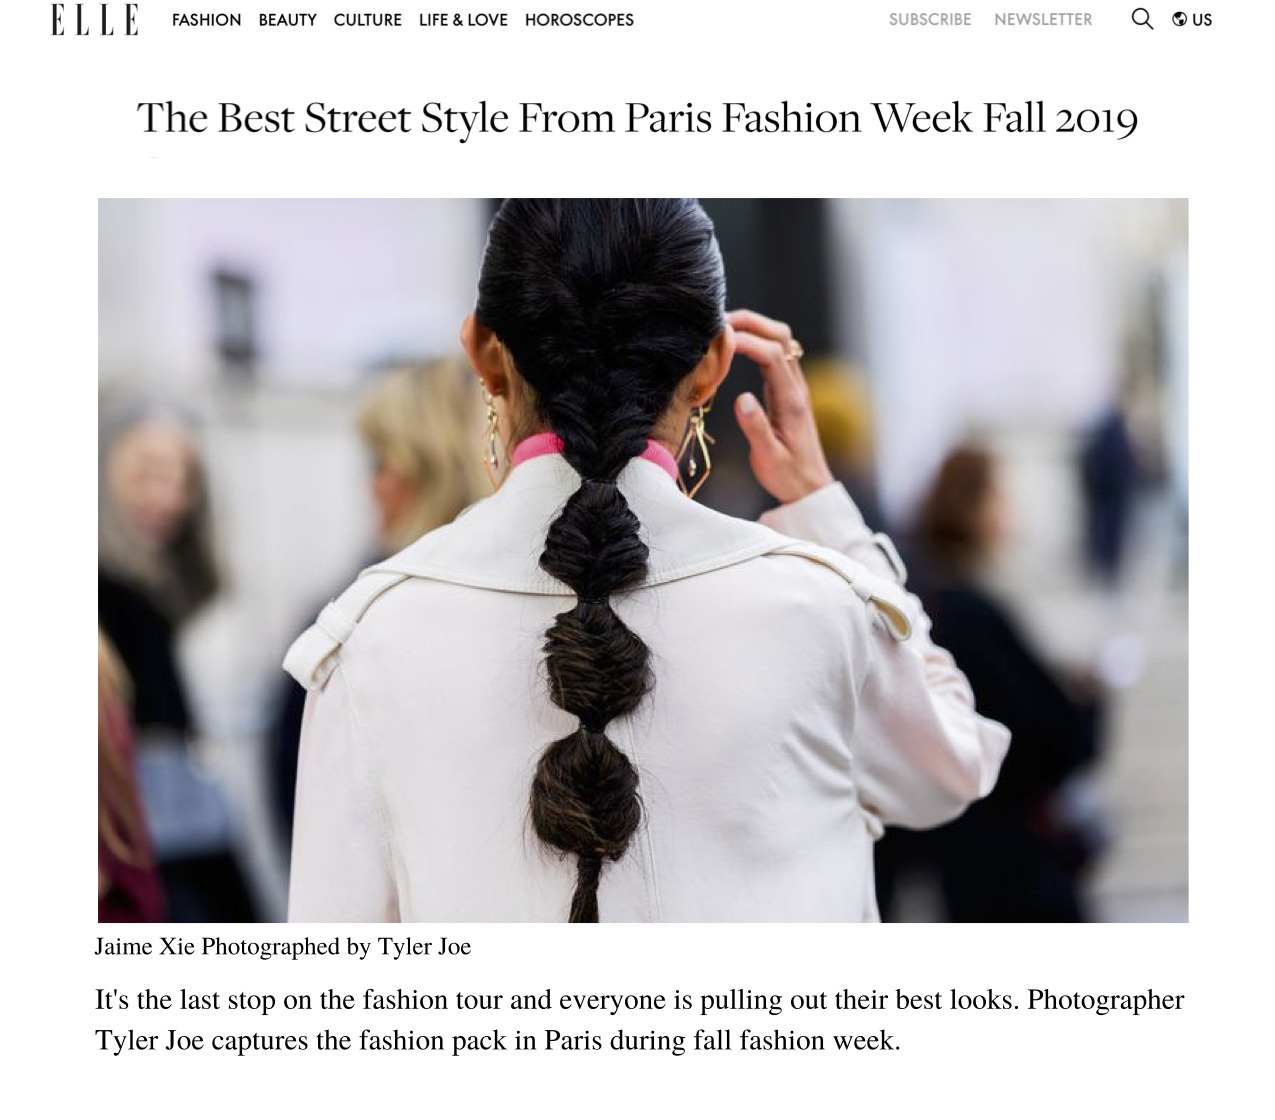 ELLE: The Best Street Style From Paris Fashion Week Fall 2019